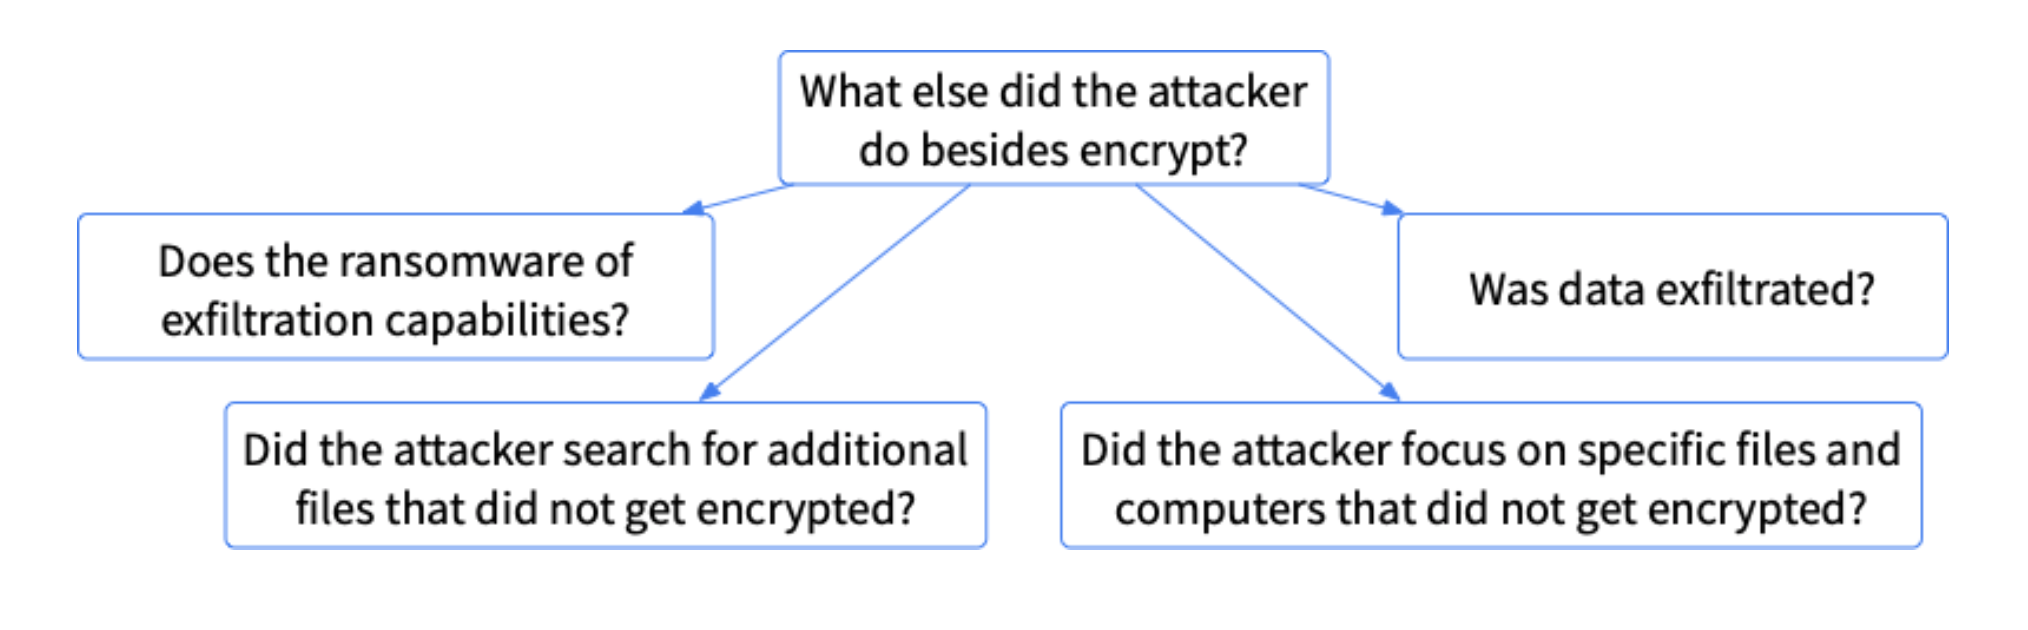 Diagram of questions relating to other actions the attacker took besides encryption.